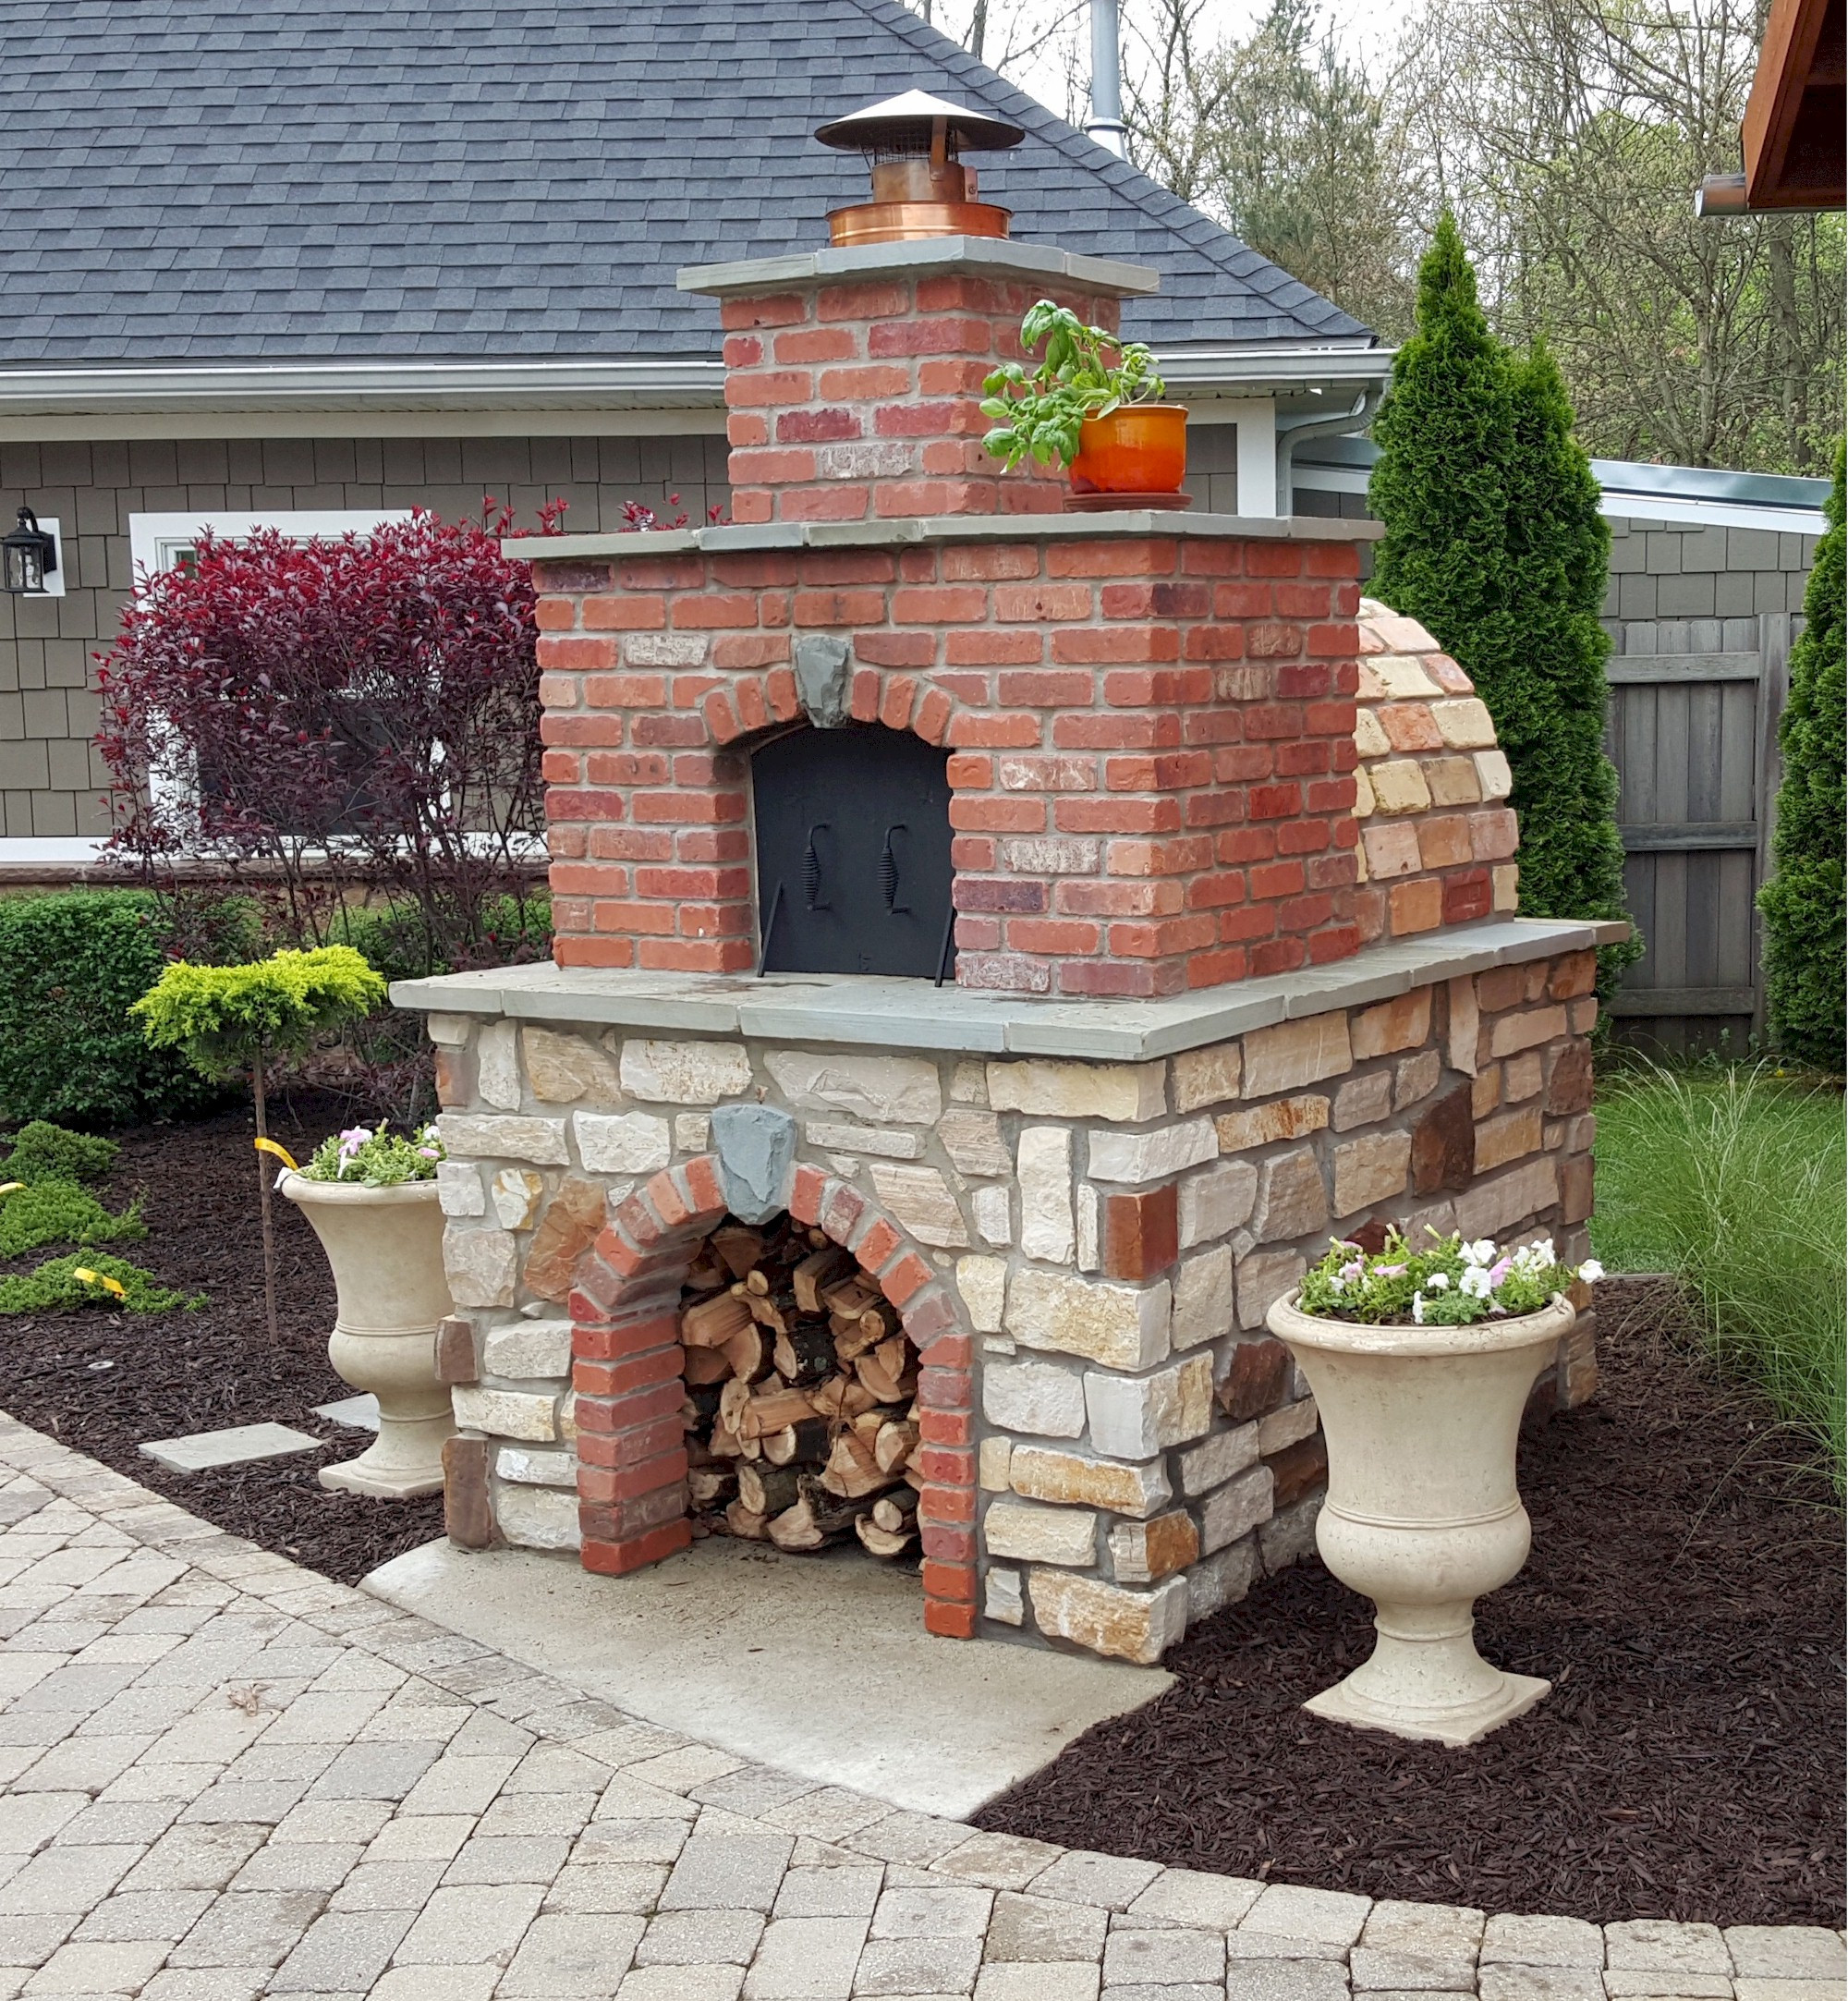 DIY Woodfire Pizza Oven
 DIY Wood Fired Outdoor Brick Pizza Ovens Are Not ly Easy